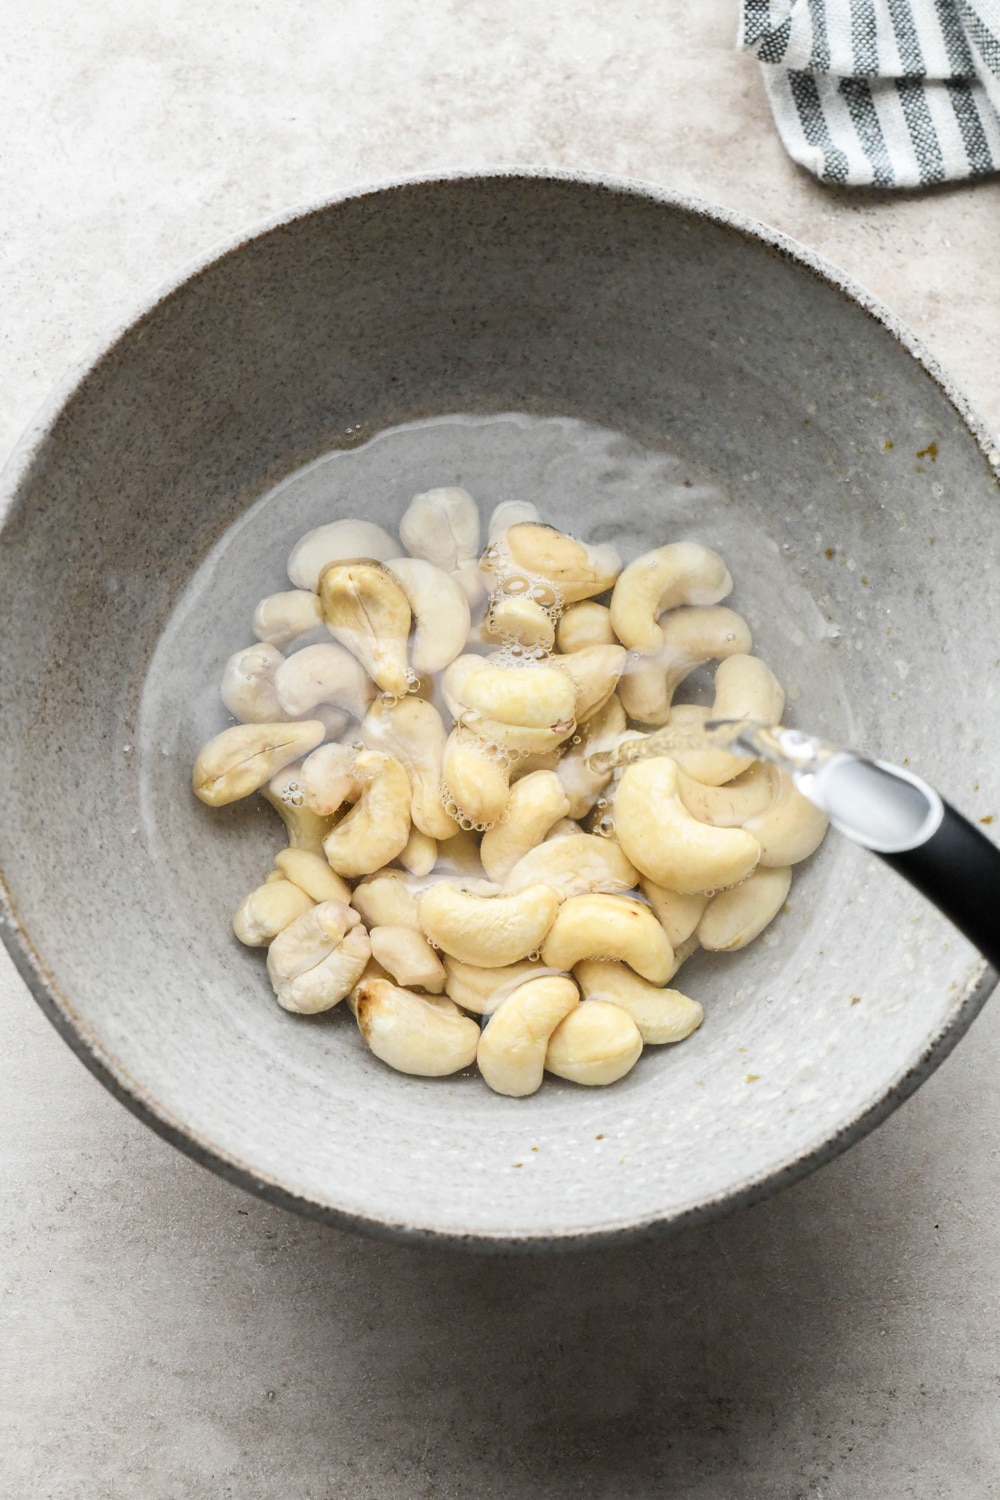 How to make Gluten Free Mushroom Gravy: Pouring boiling water from a tea kettle over raw cashews in a small grey ceramic bowl.